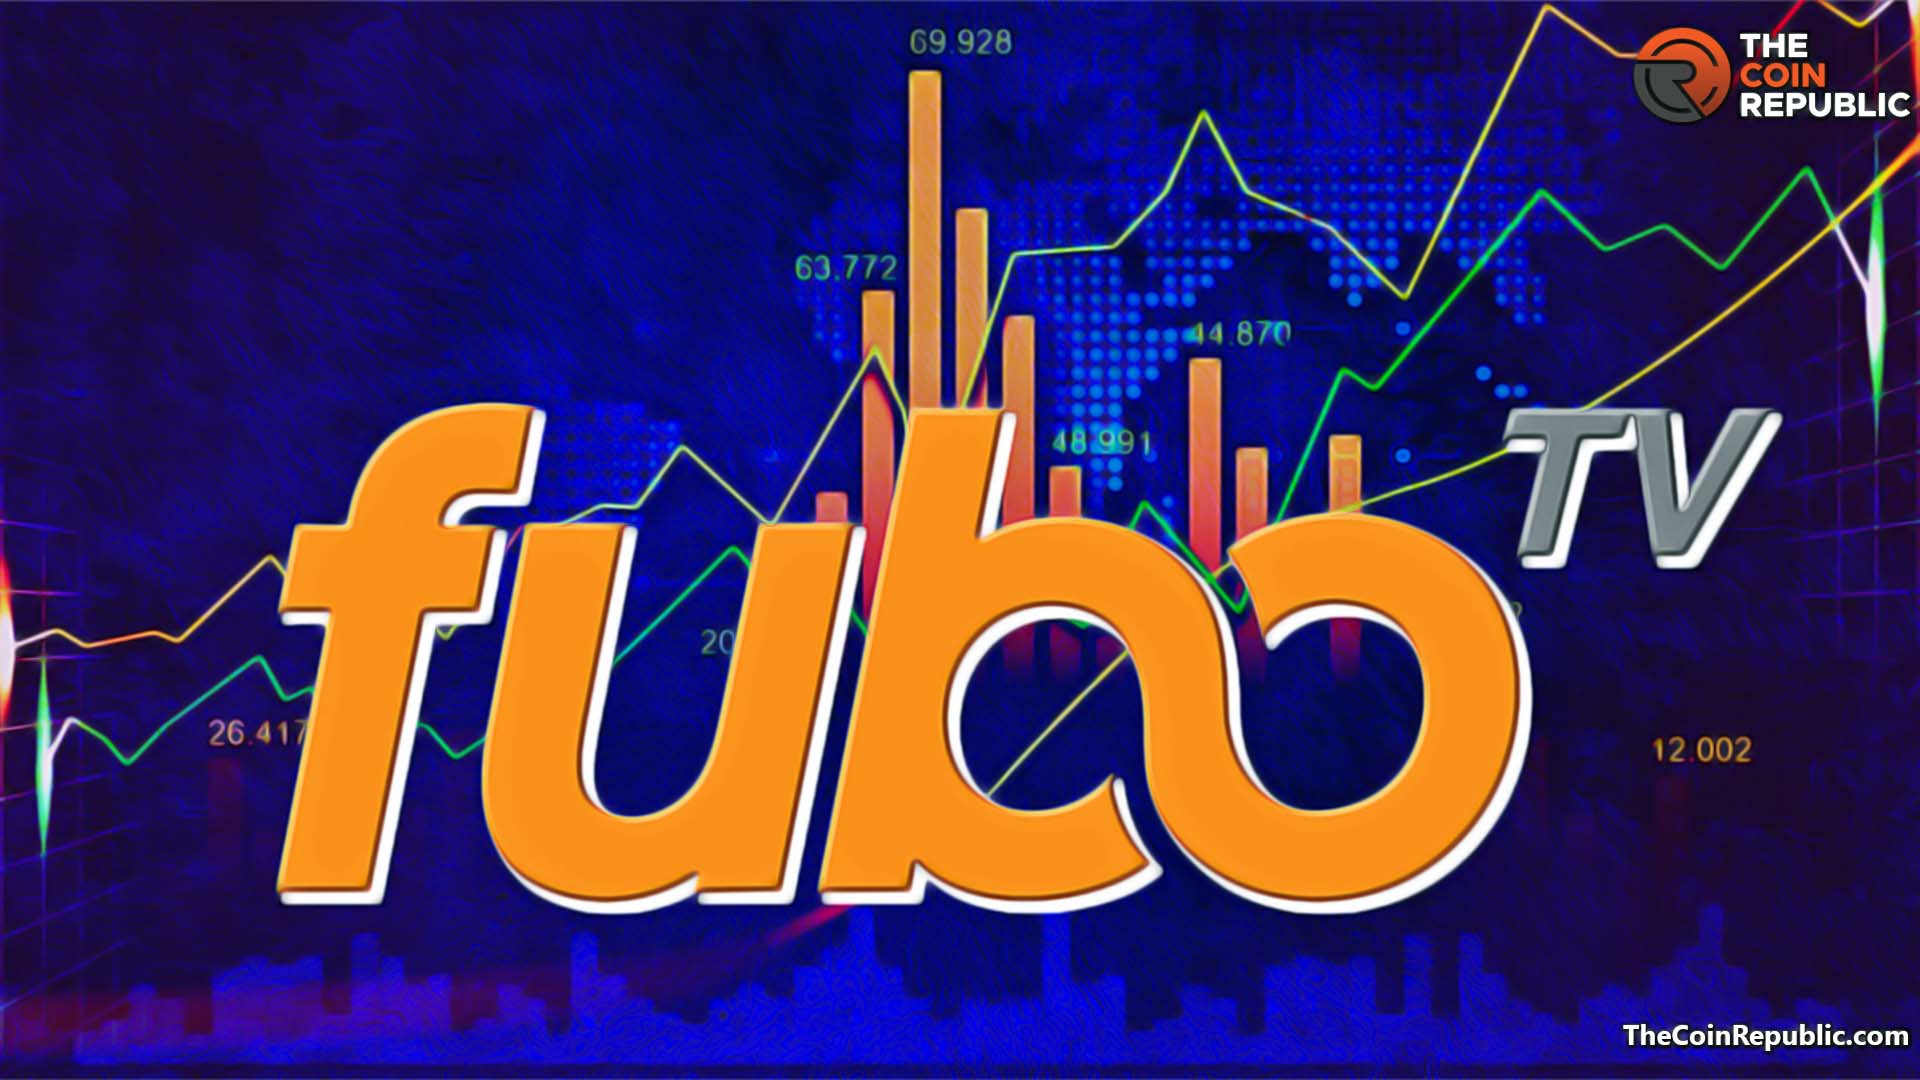 FUBO Stock Price Analysis Is There Any Hope Left for FUBO? The Coin